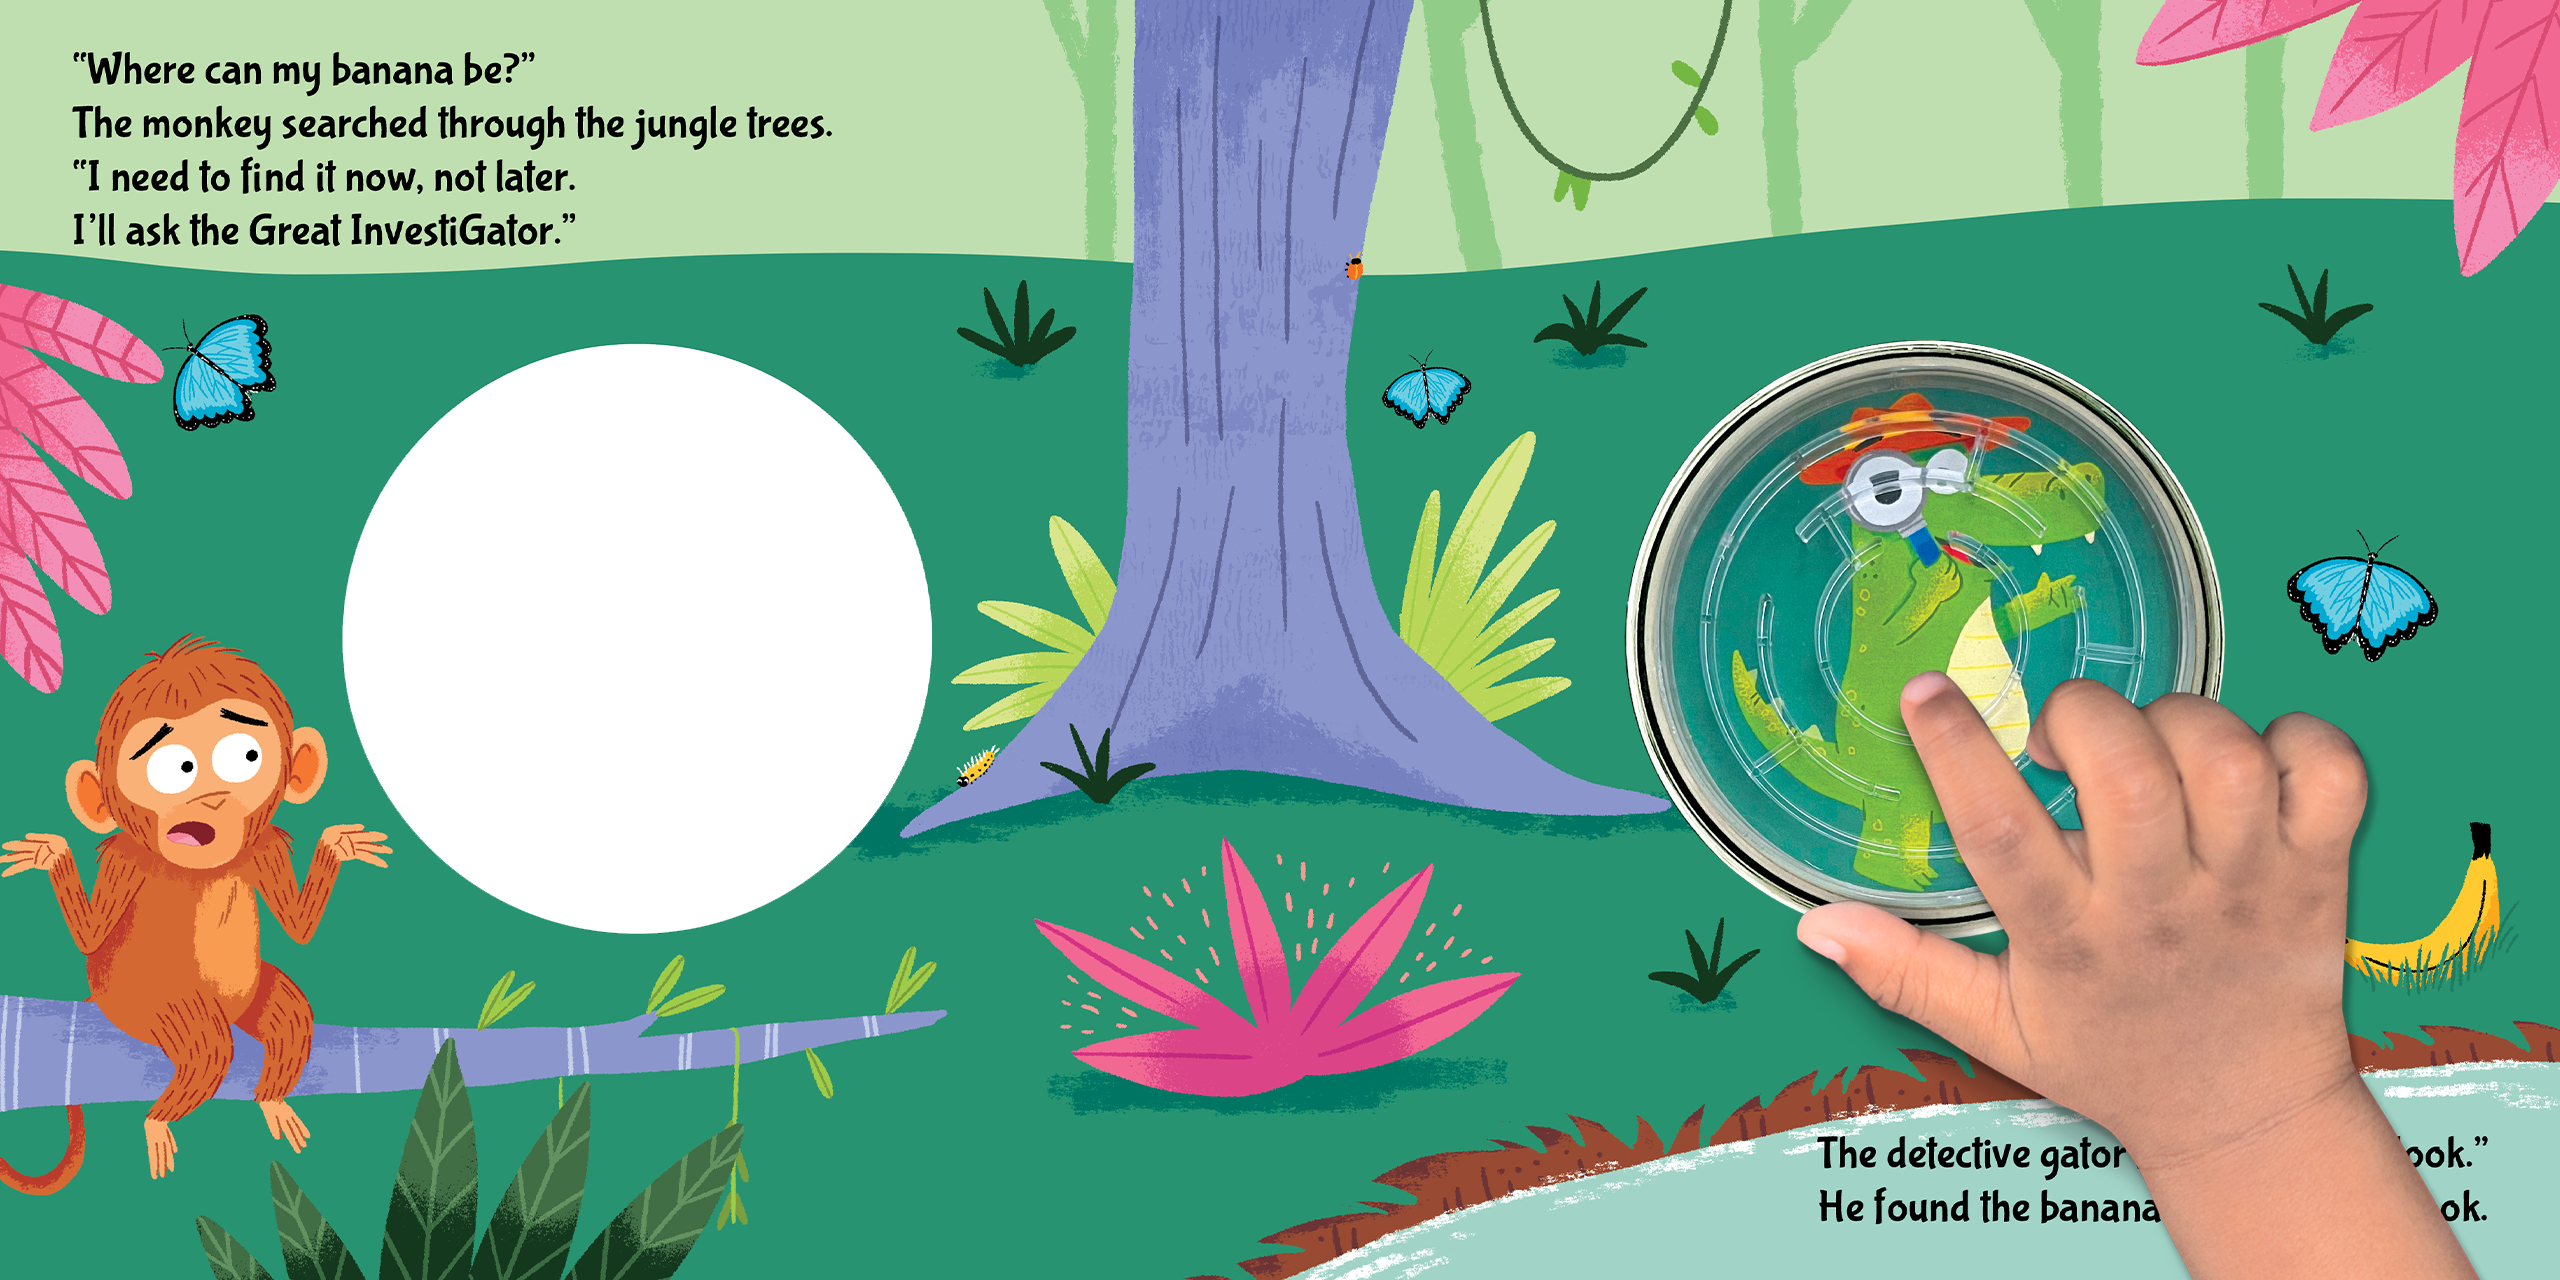 The Great InvestiGator- Children's Sensory Storybook with Touch and Fidget Bead Maze